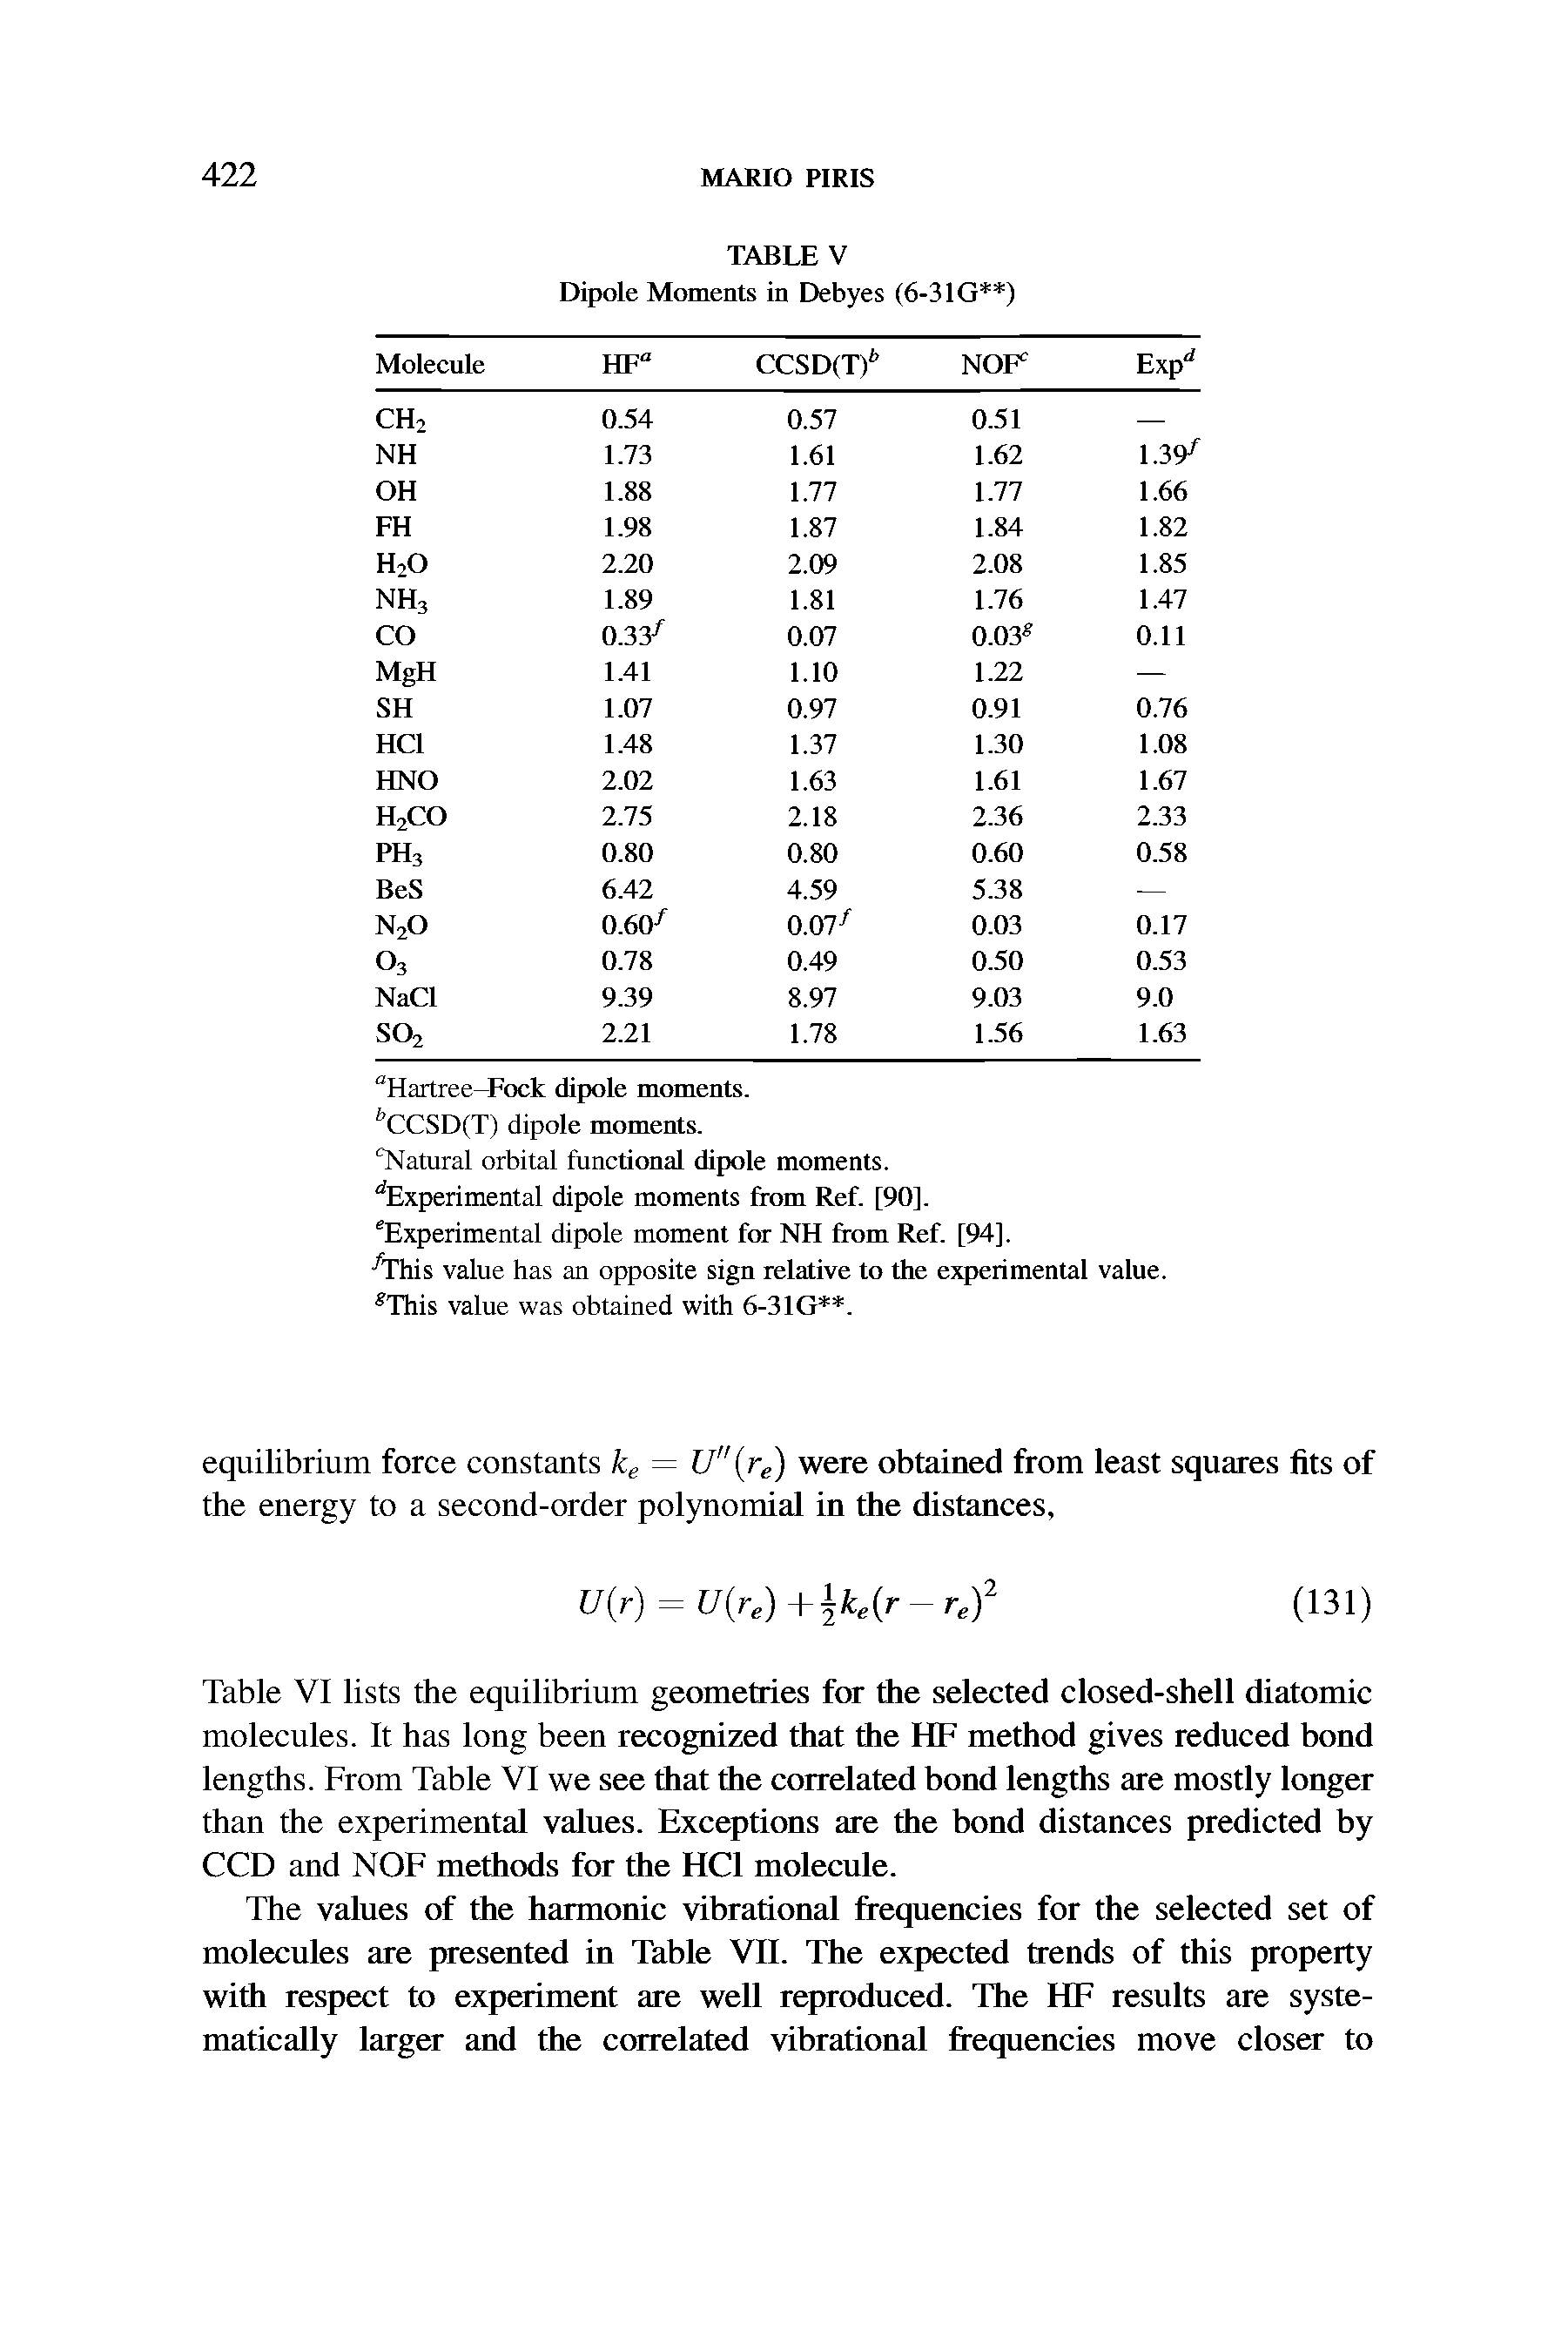 Table VI lists the equilibrium geometries for the selected closed-shell diatomic molecules. It has long been recognized that the HF method gives reduced bond lengths. From Table VI we see that the correlated bond lengths are mostly longer than the experimental values. Exceptions are the bond distances predicted by CCD and NOF methods for the HCl molecule.